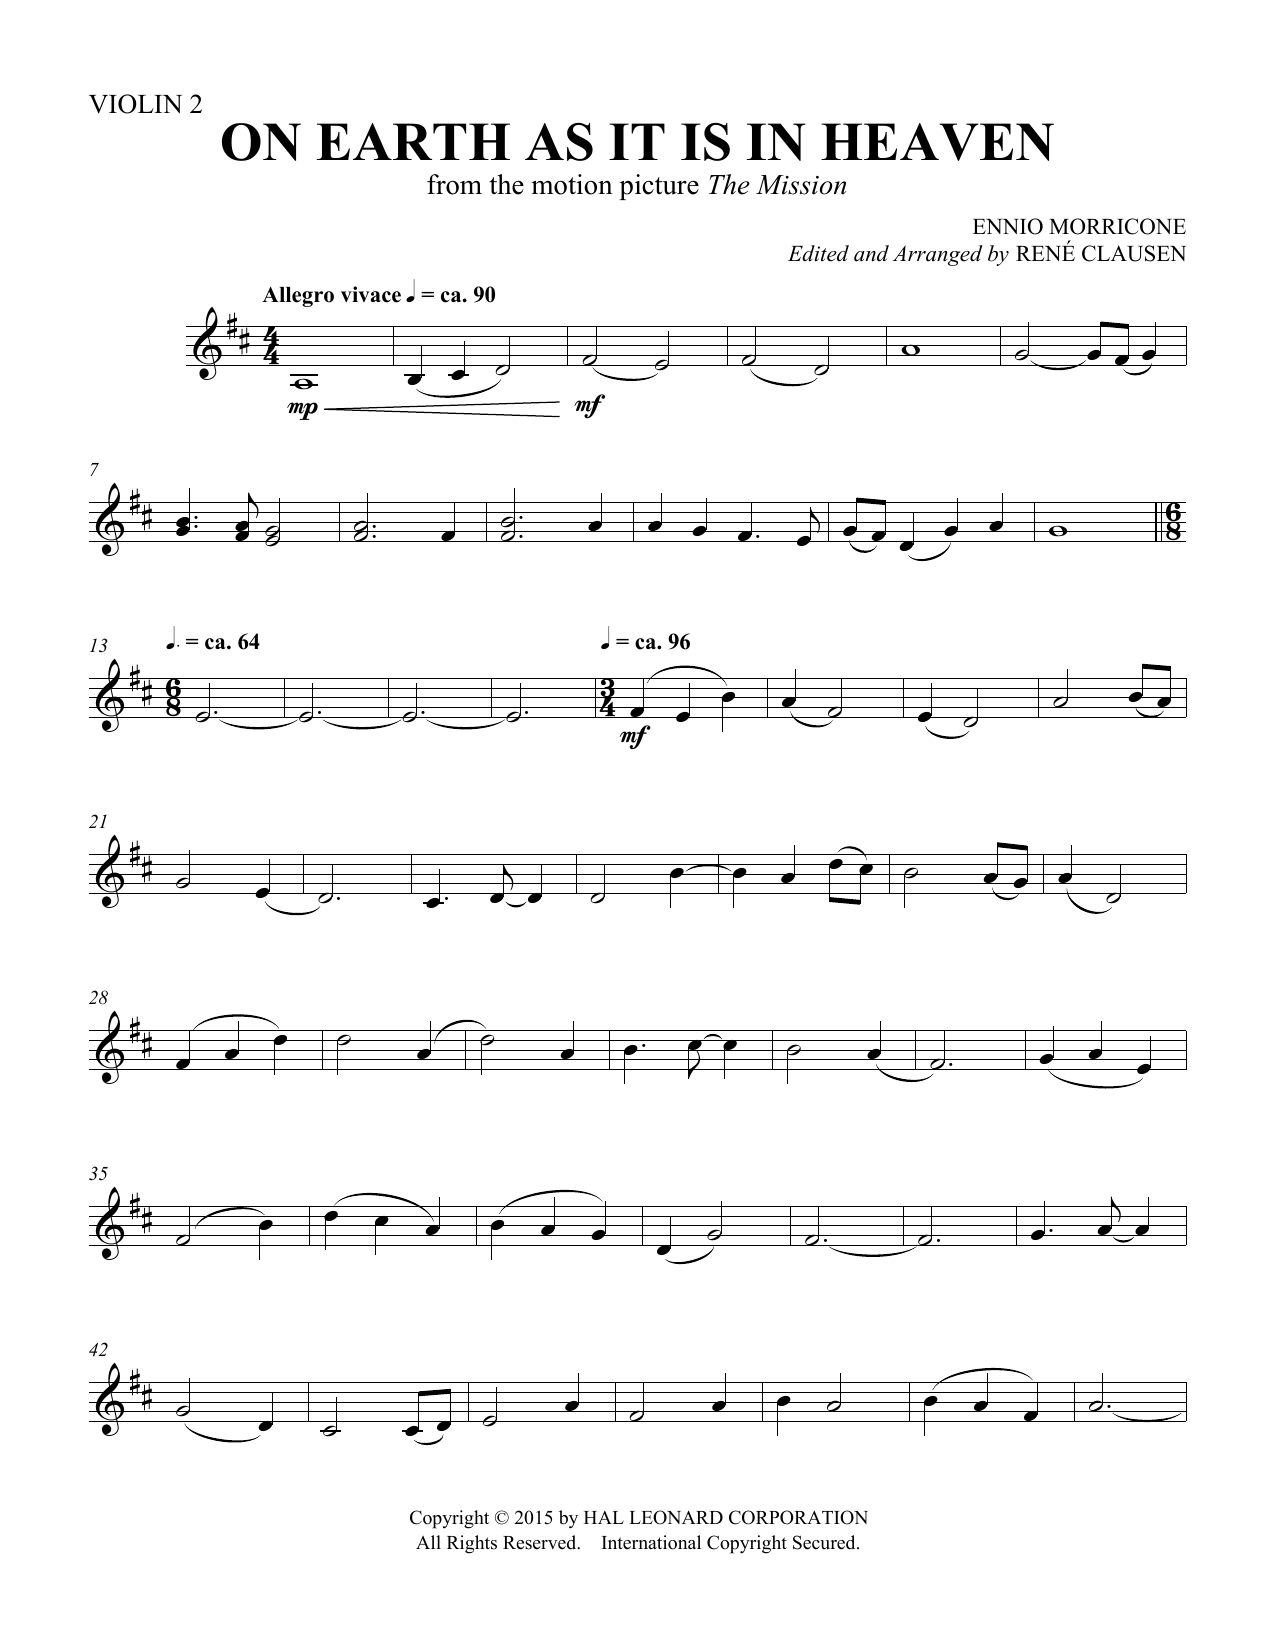 Rene Clausen On Earth As It Is In Heaven - Violin 2 sheet music notes and chords. Download Printable PDF.